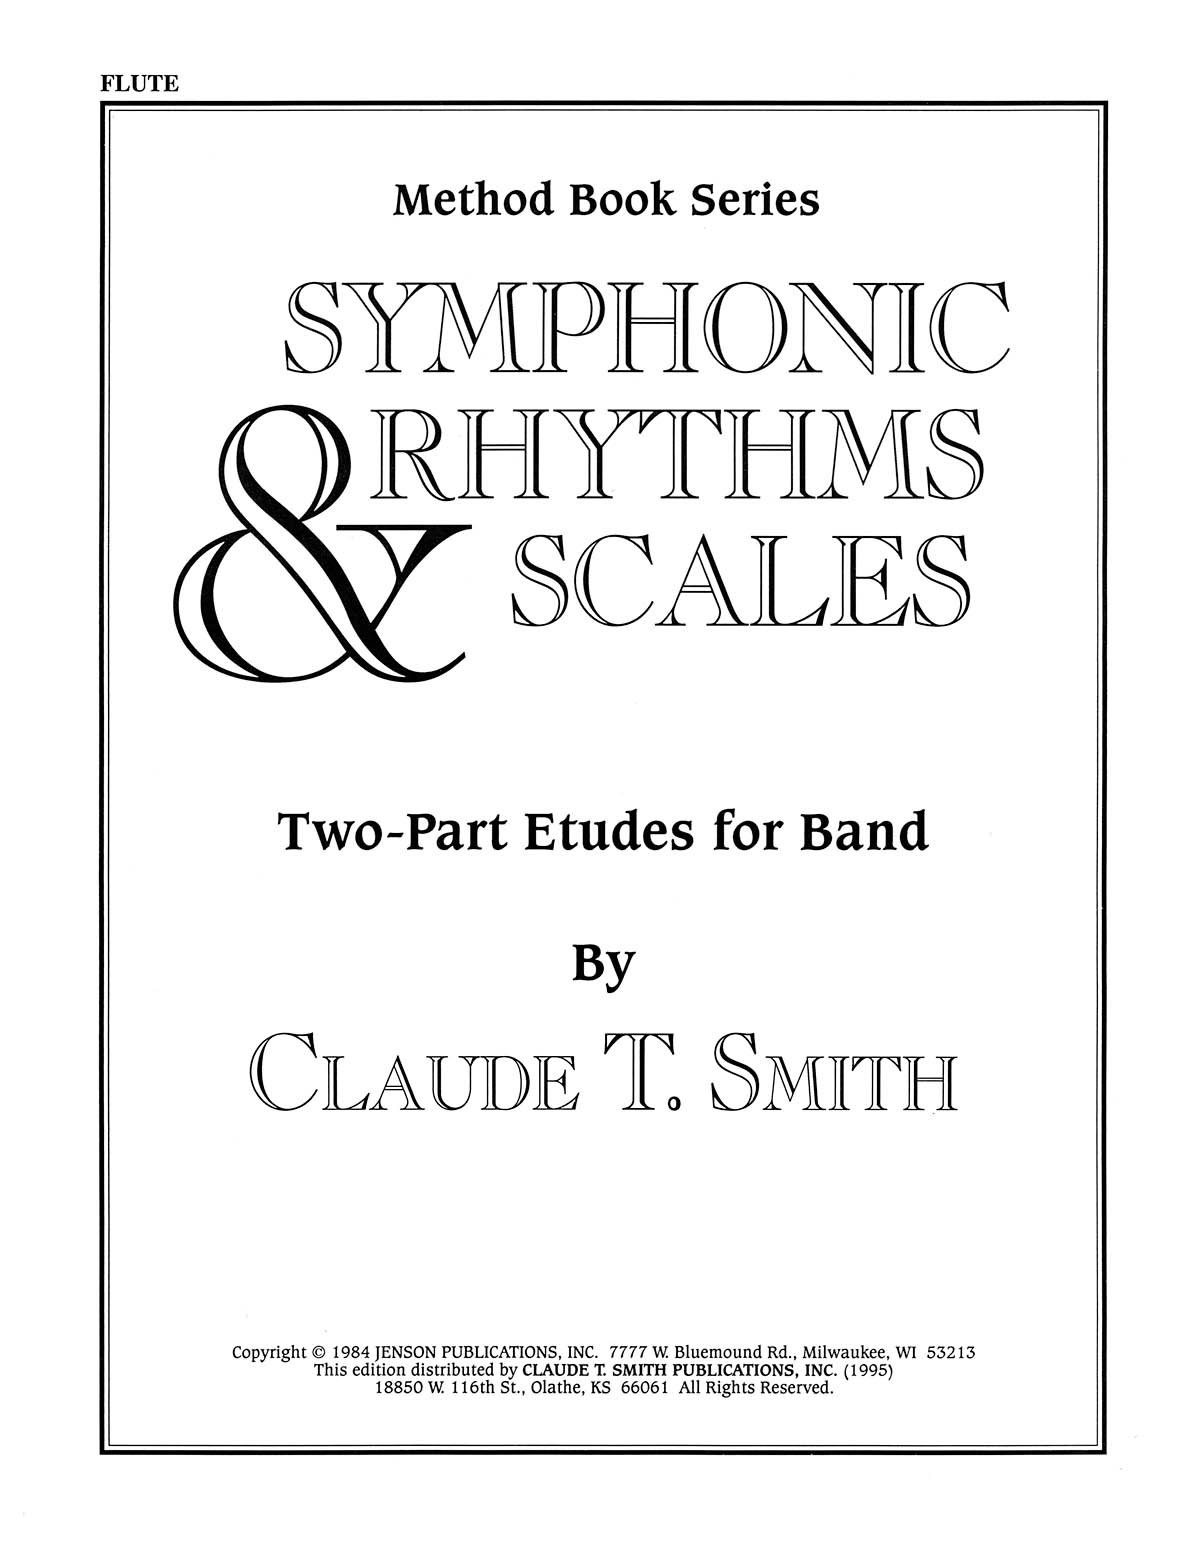 Symphonic Rhythms & Scales(Two-Part Etudes For Band and Orchestra Flute)